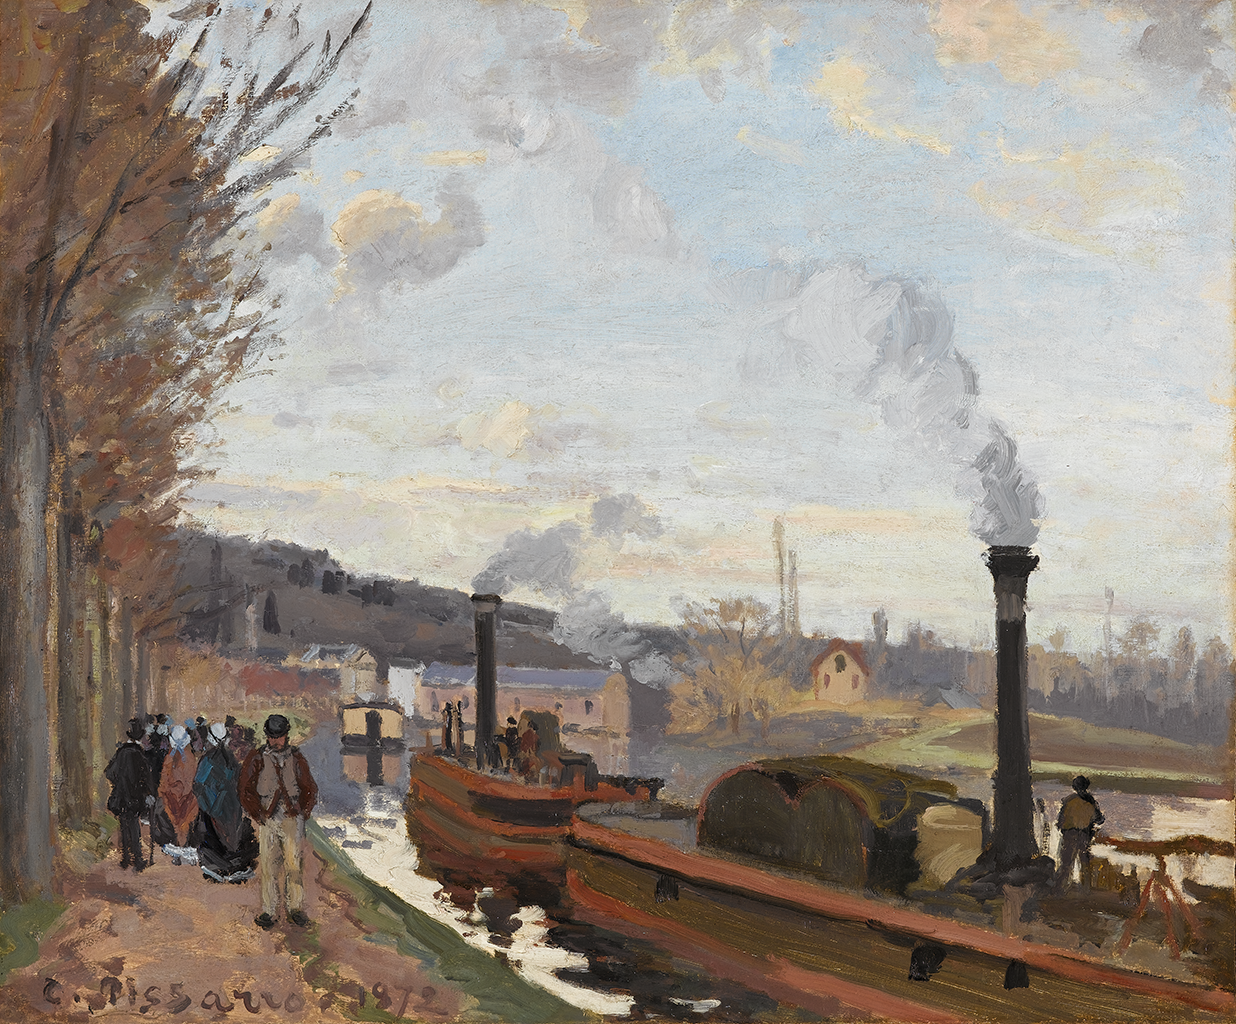 A painting of two red and brown steamboats creating clouds of smoke that sail through a river towards a town. To the left of the vessels are a group of people walk on the dirt path near a wall of trees with brown leaves. The sky above has a faint blue color and some clouds scattered across the sky.